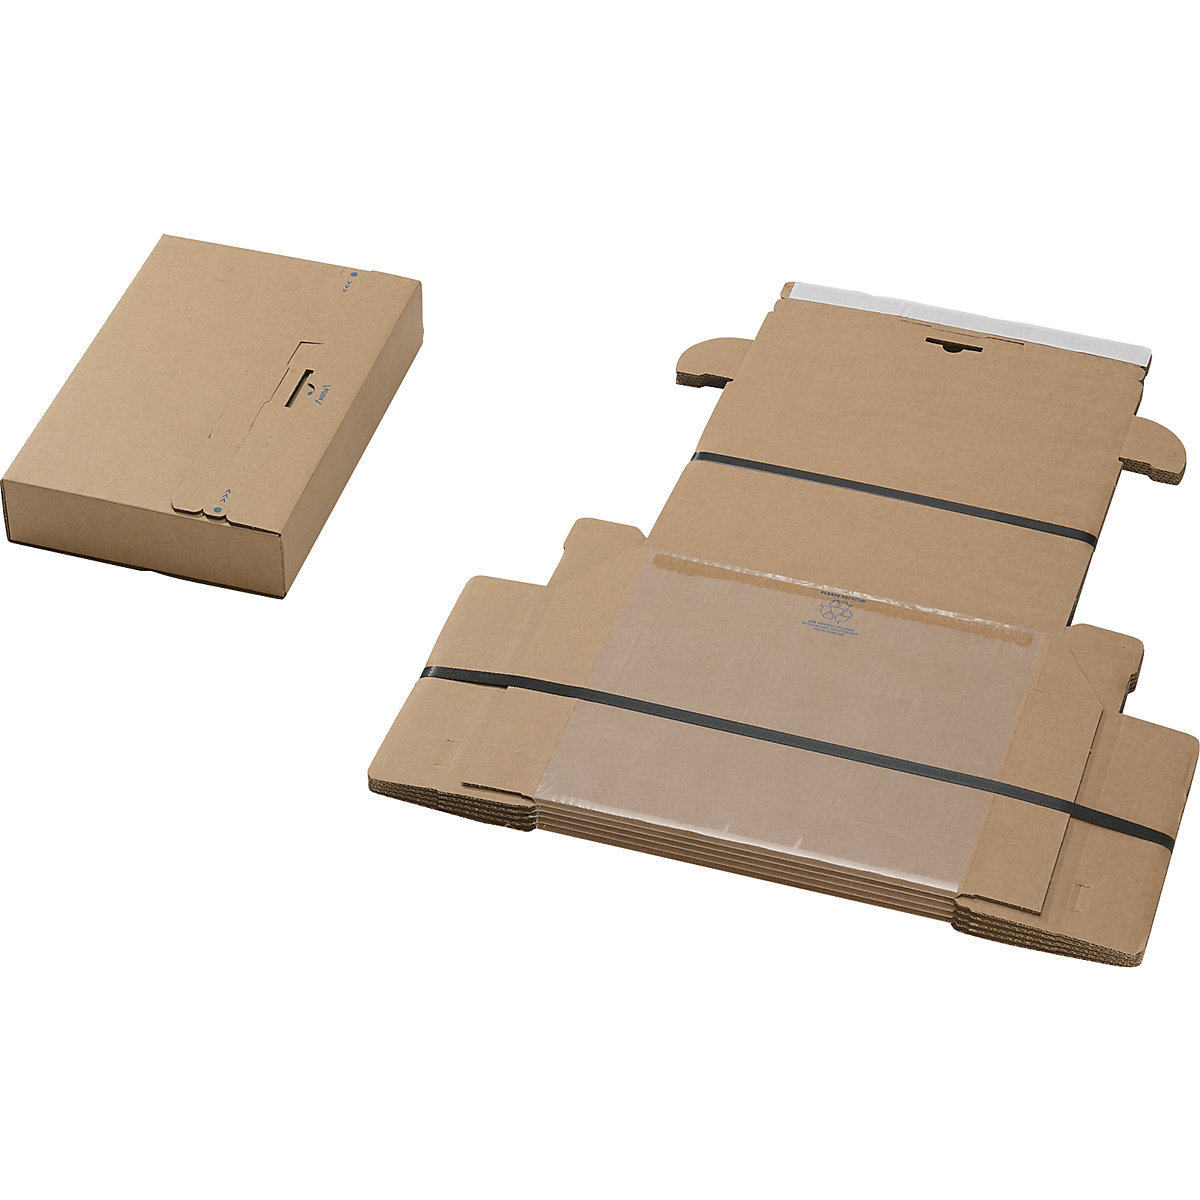 Fixierverpackung, „all in one'', VE 40 Stk, für Packmaß LxBxH 300 x 190 x 40 mm-2